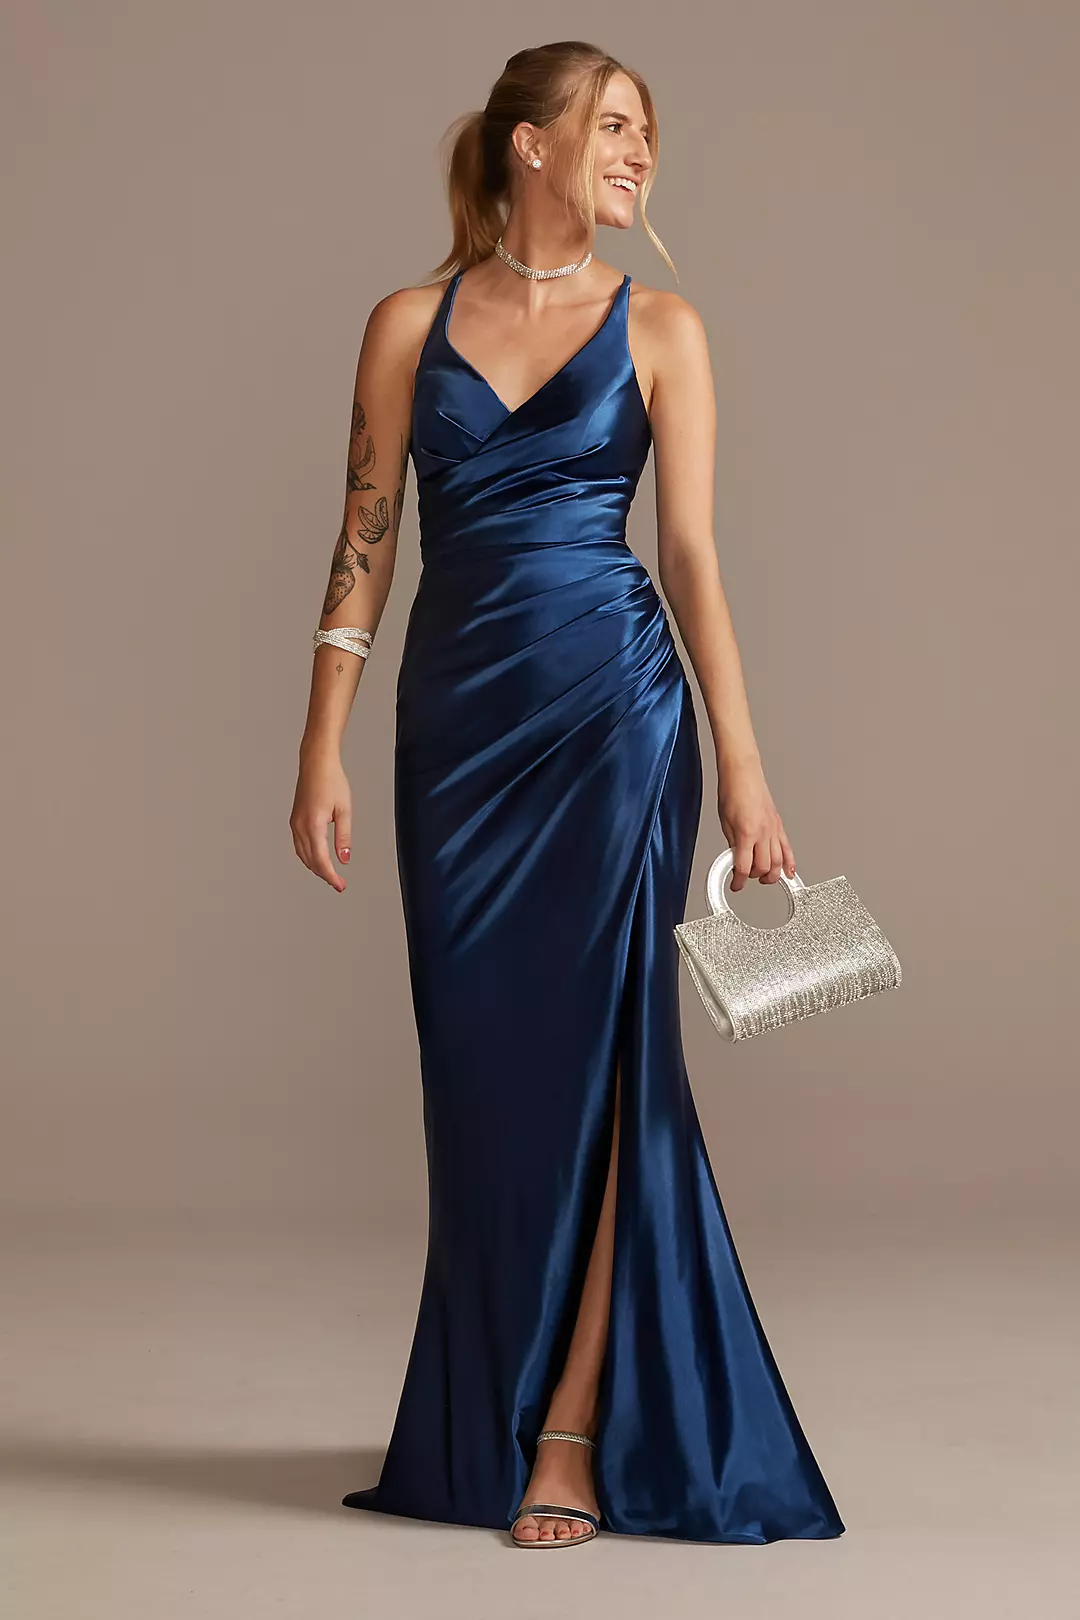 Ruched V-Neck Stretch Satin Sheath Gown with Slit Image